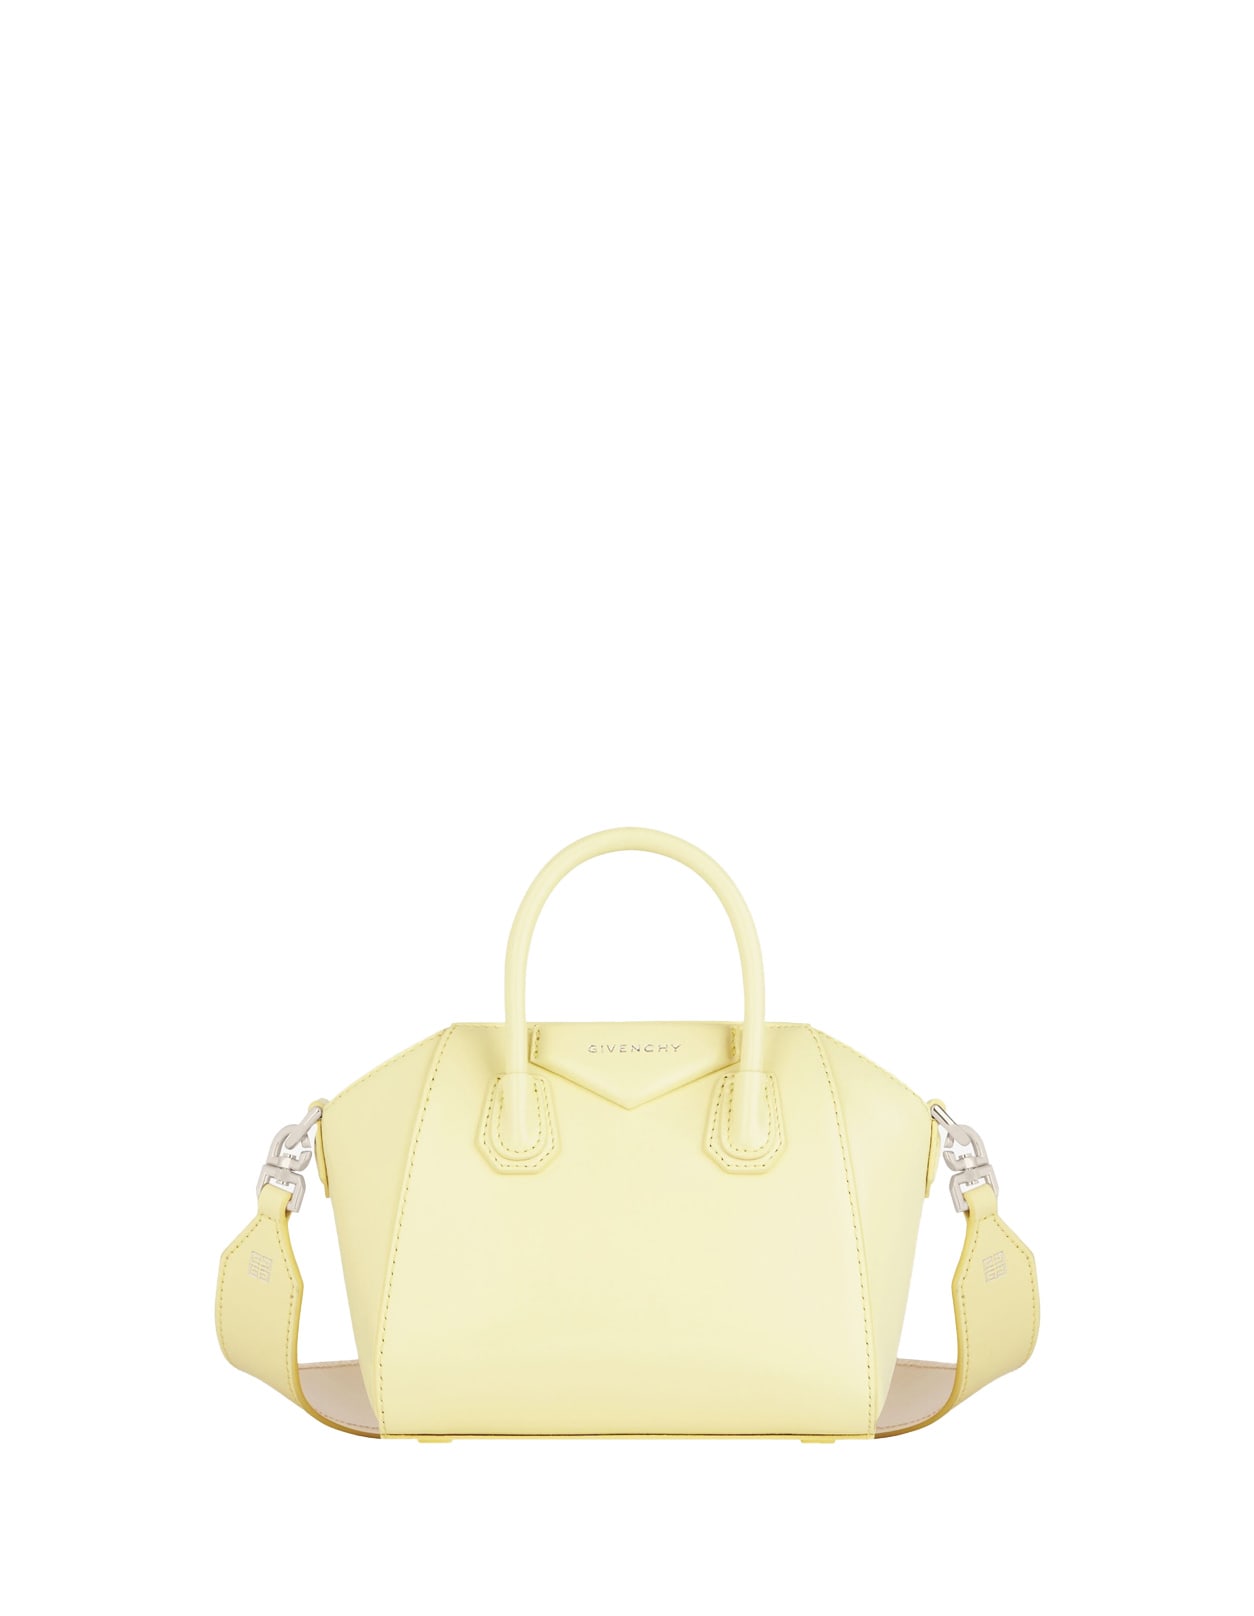 GIVENCHY ANTIGONA TOY BAG IN SOFT YELLOW AND NATURAL BEIGE BOX LEATHER